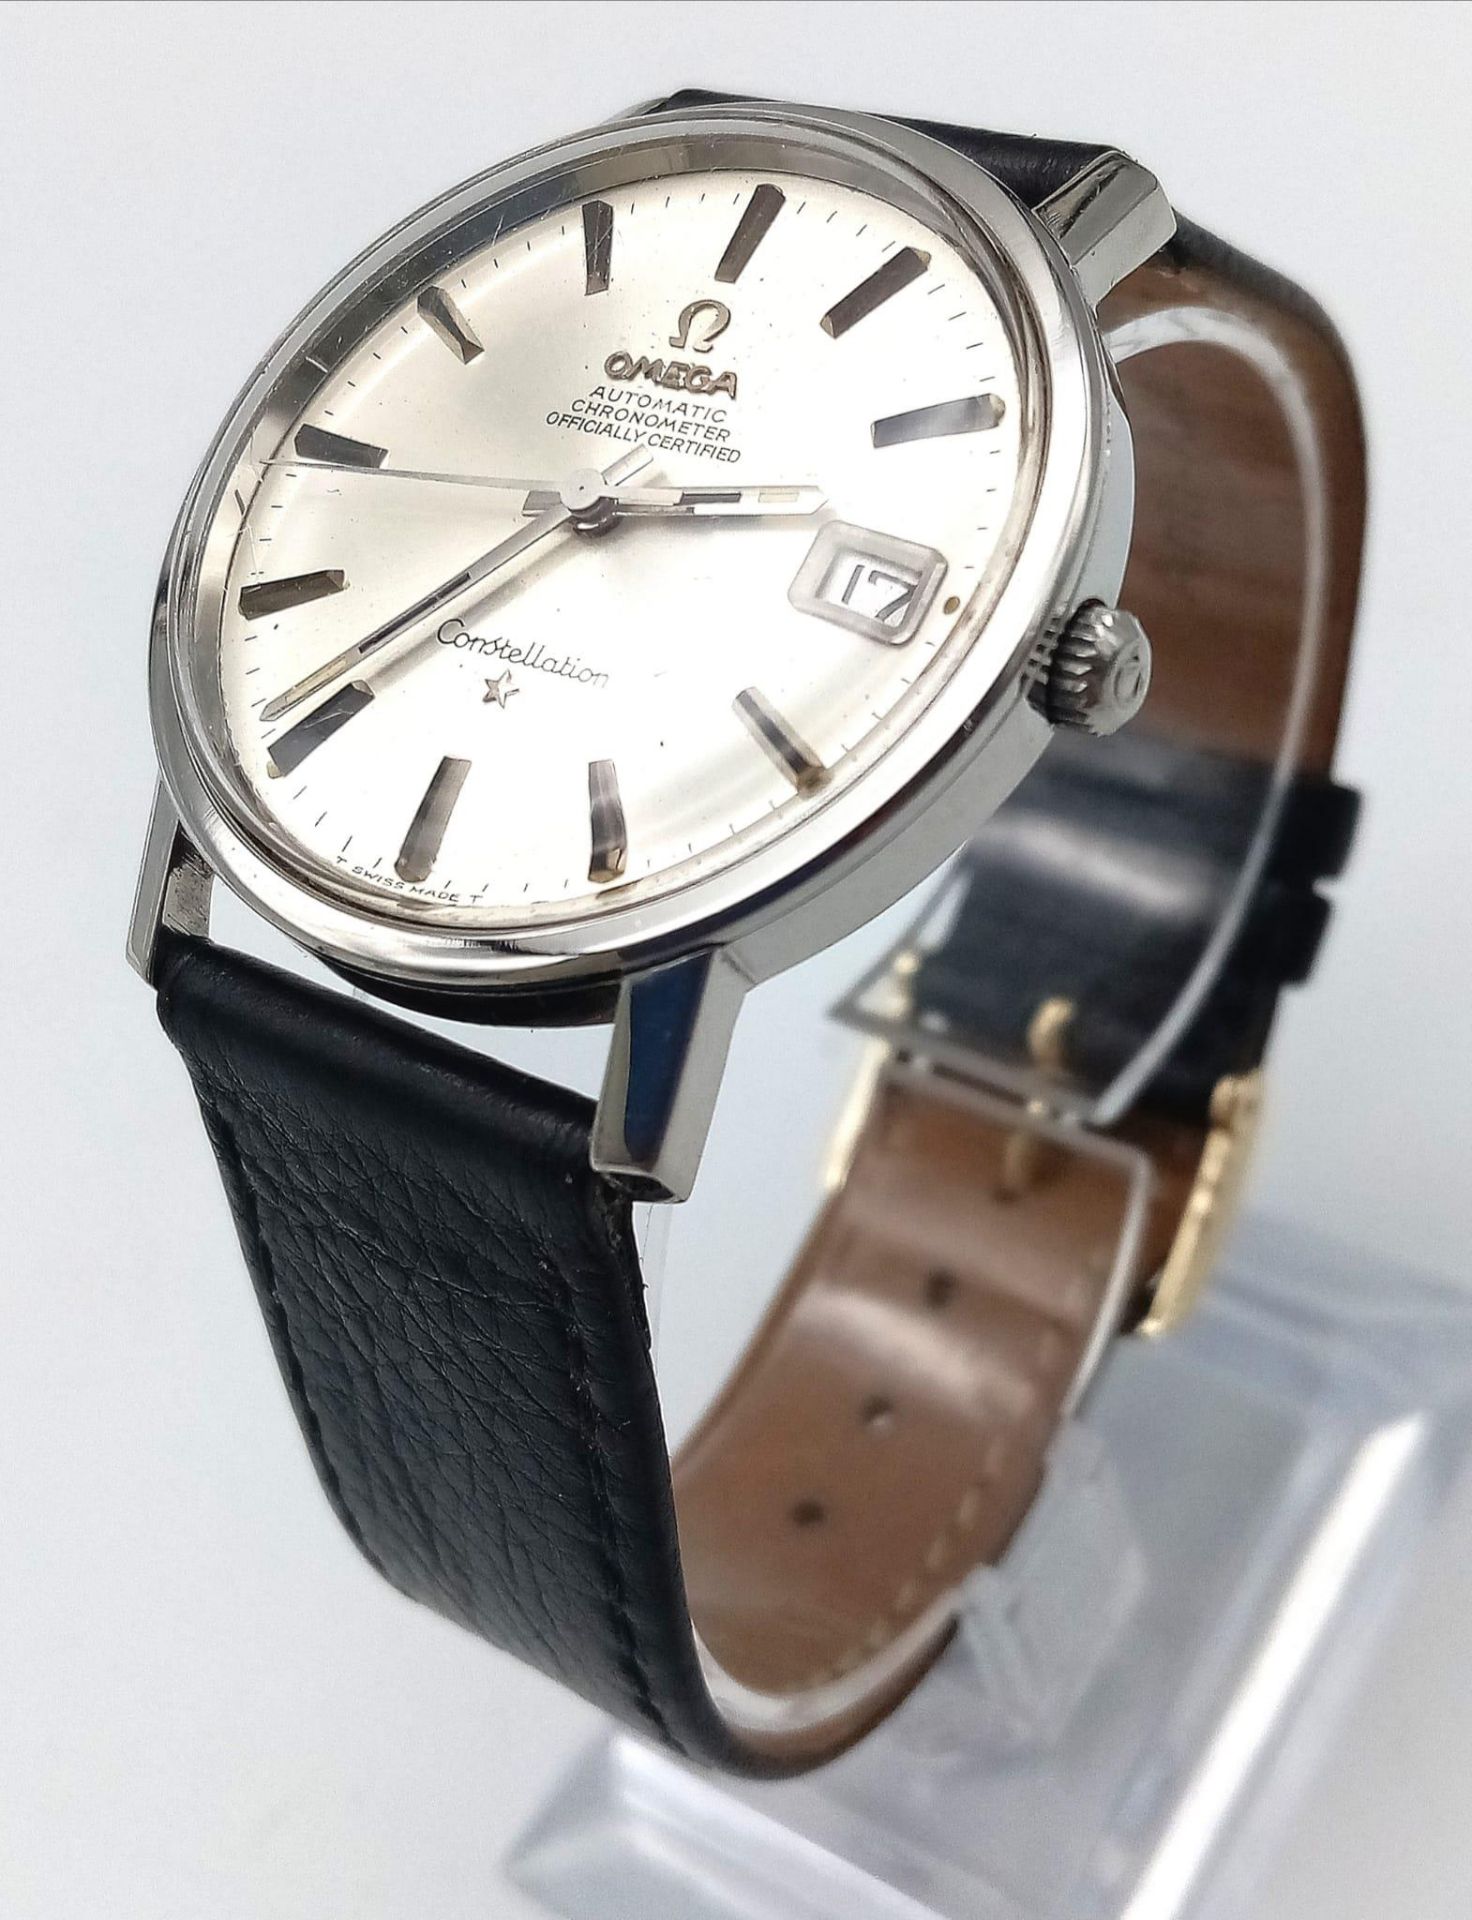 Omega Constellation Chronometer Men's Watch. Automatic movement, leather strap, 32mm dial. Circa